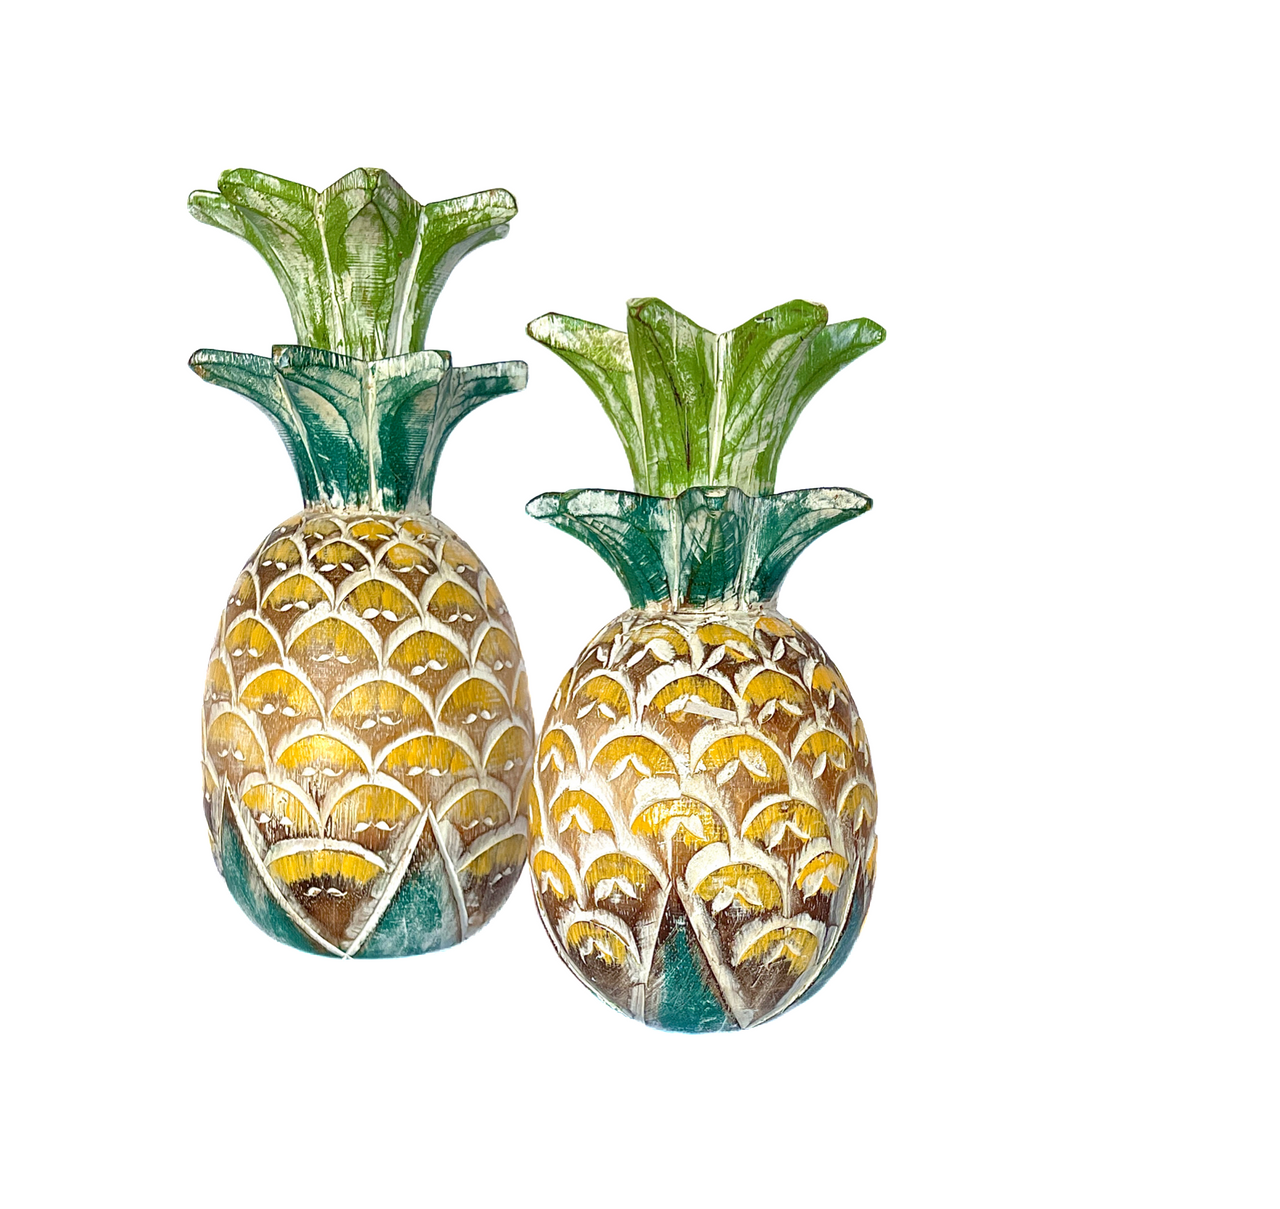 Wooden realistic large pineapple carvings set of 2